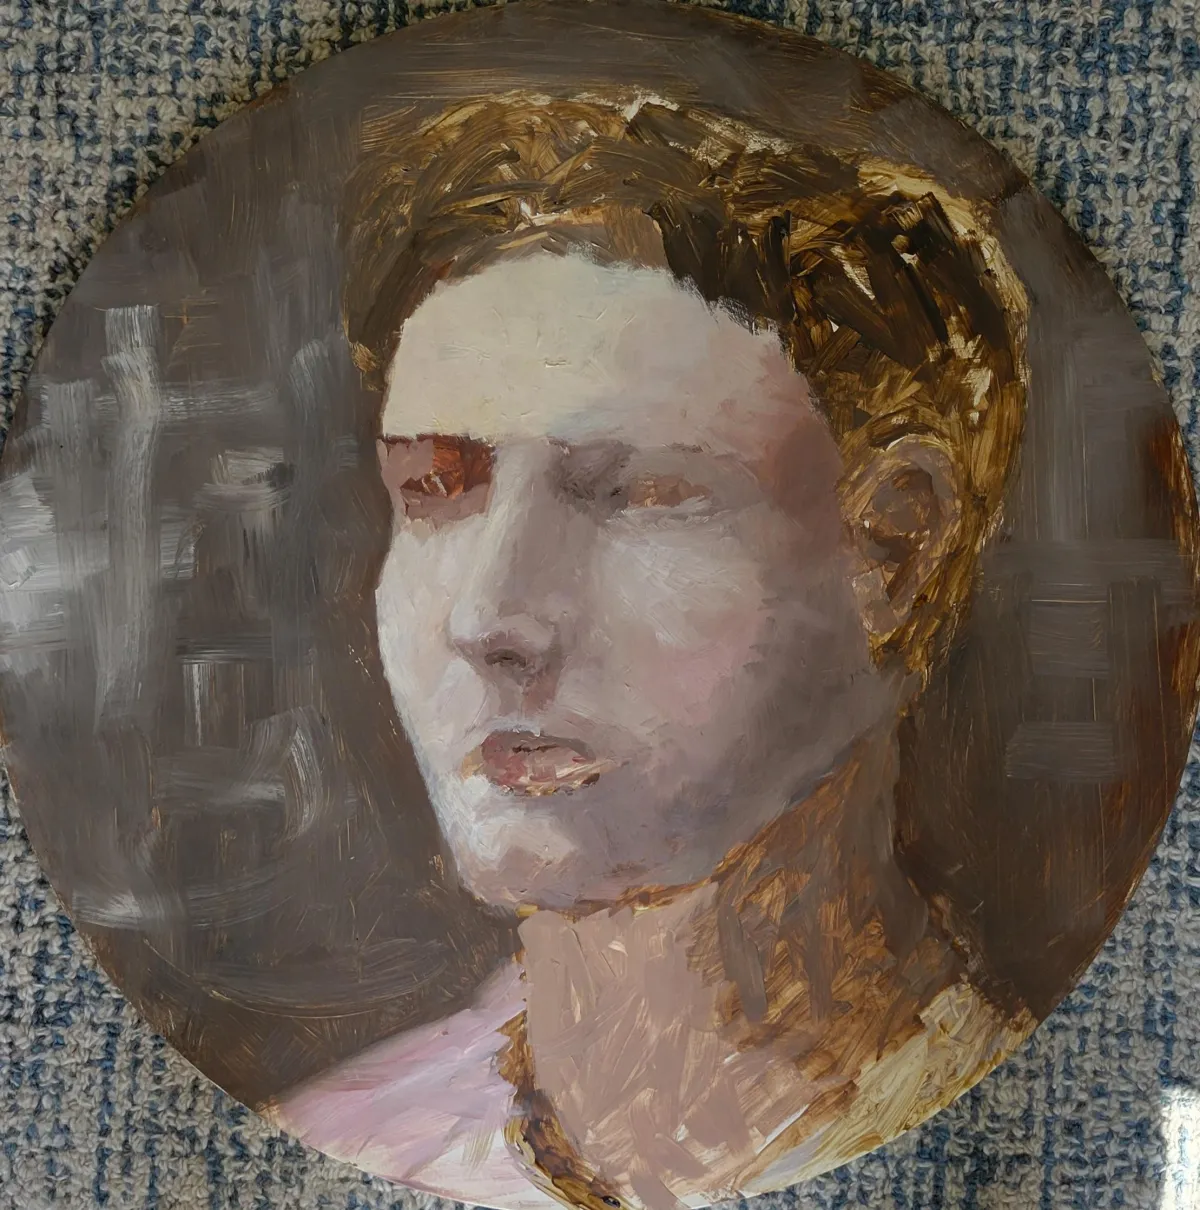 A portrait painting on a round wooden canvas